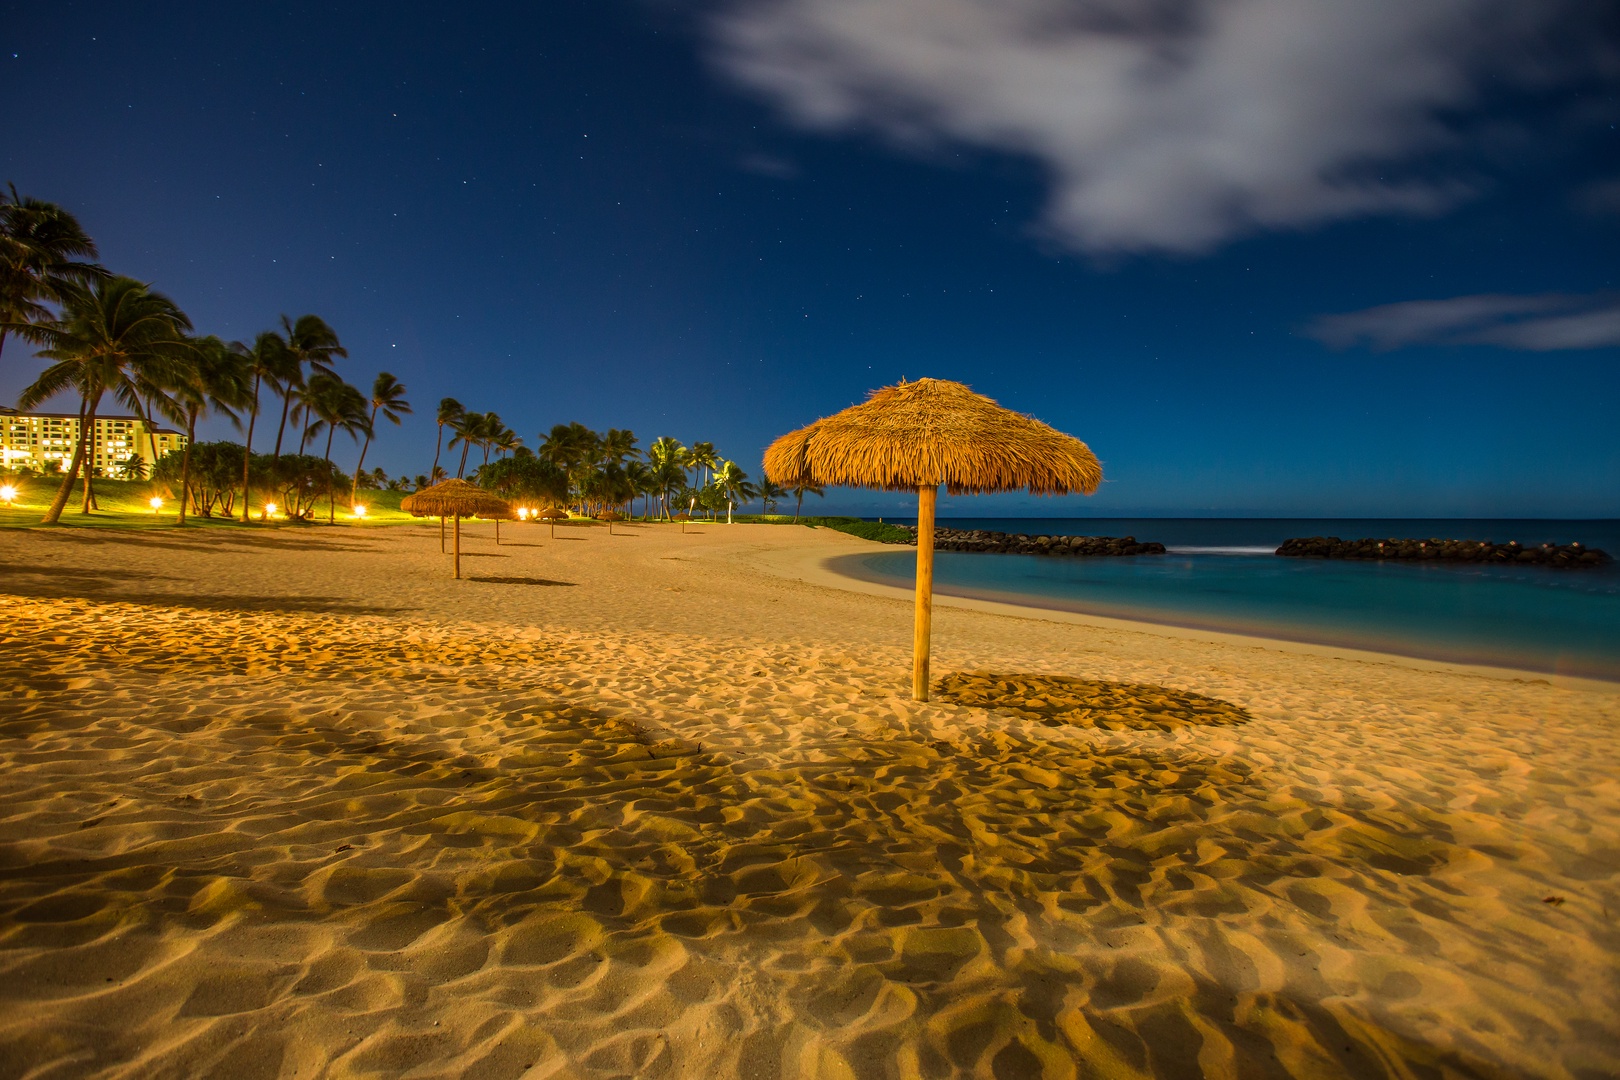 Kapolei Vacation Rentals, Coconut Plantation 1222-3 - Take an evening stroll in the soft sand along the lagoon shore.